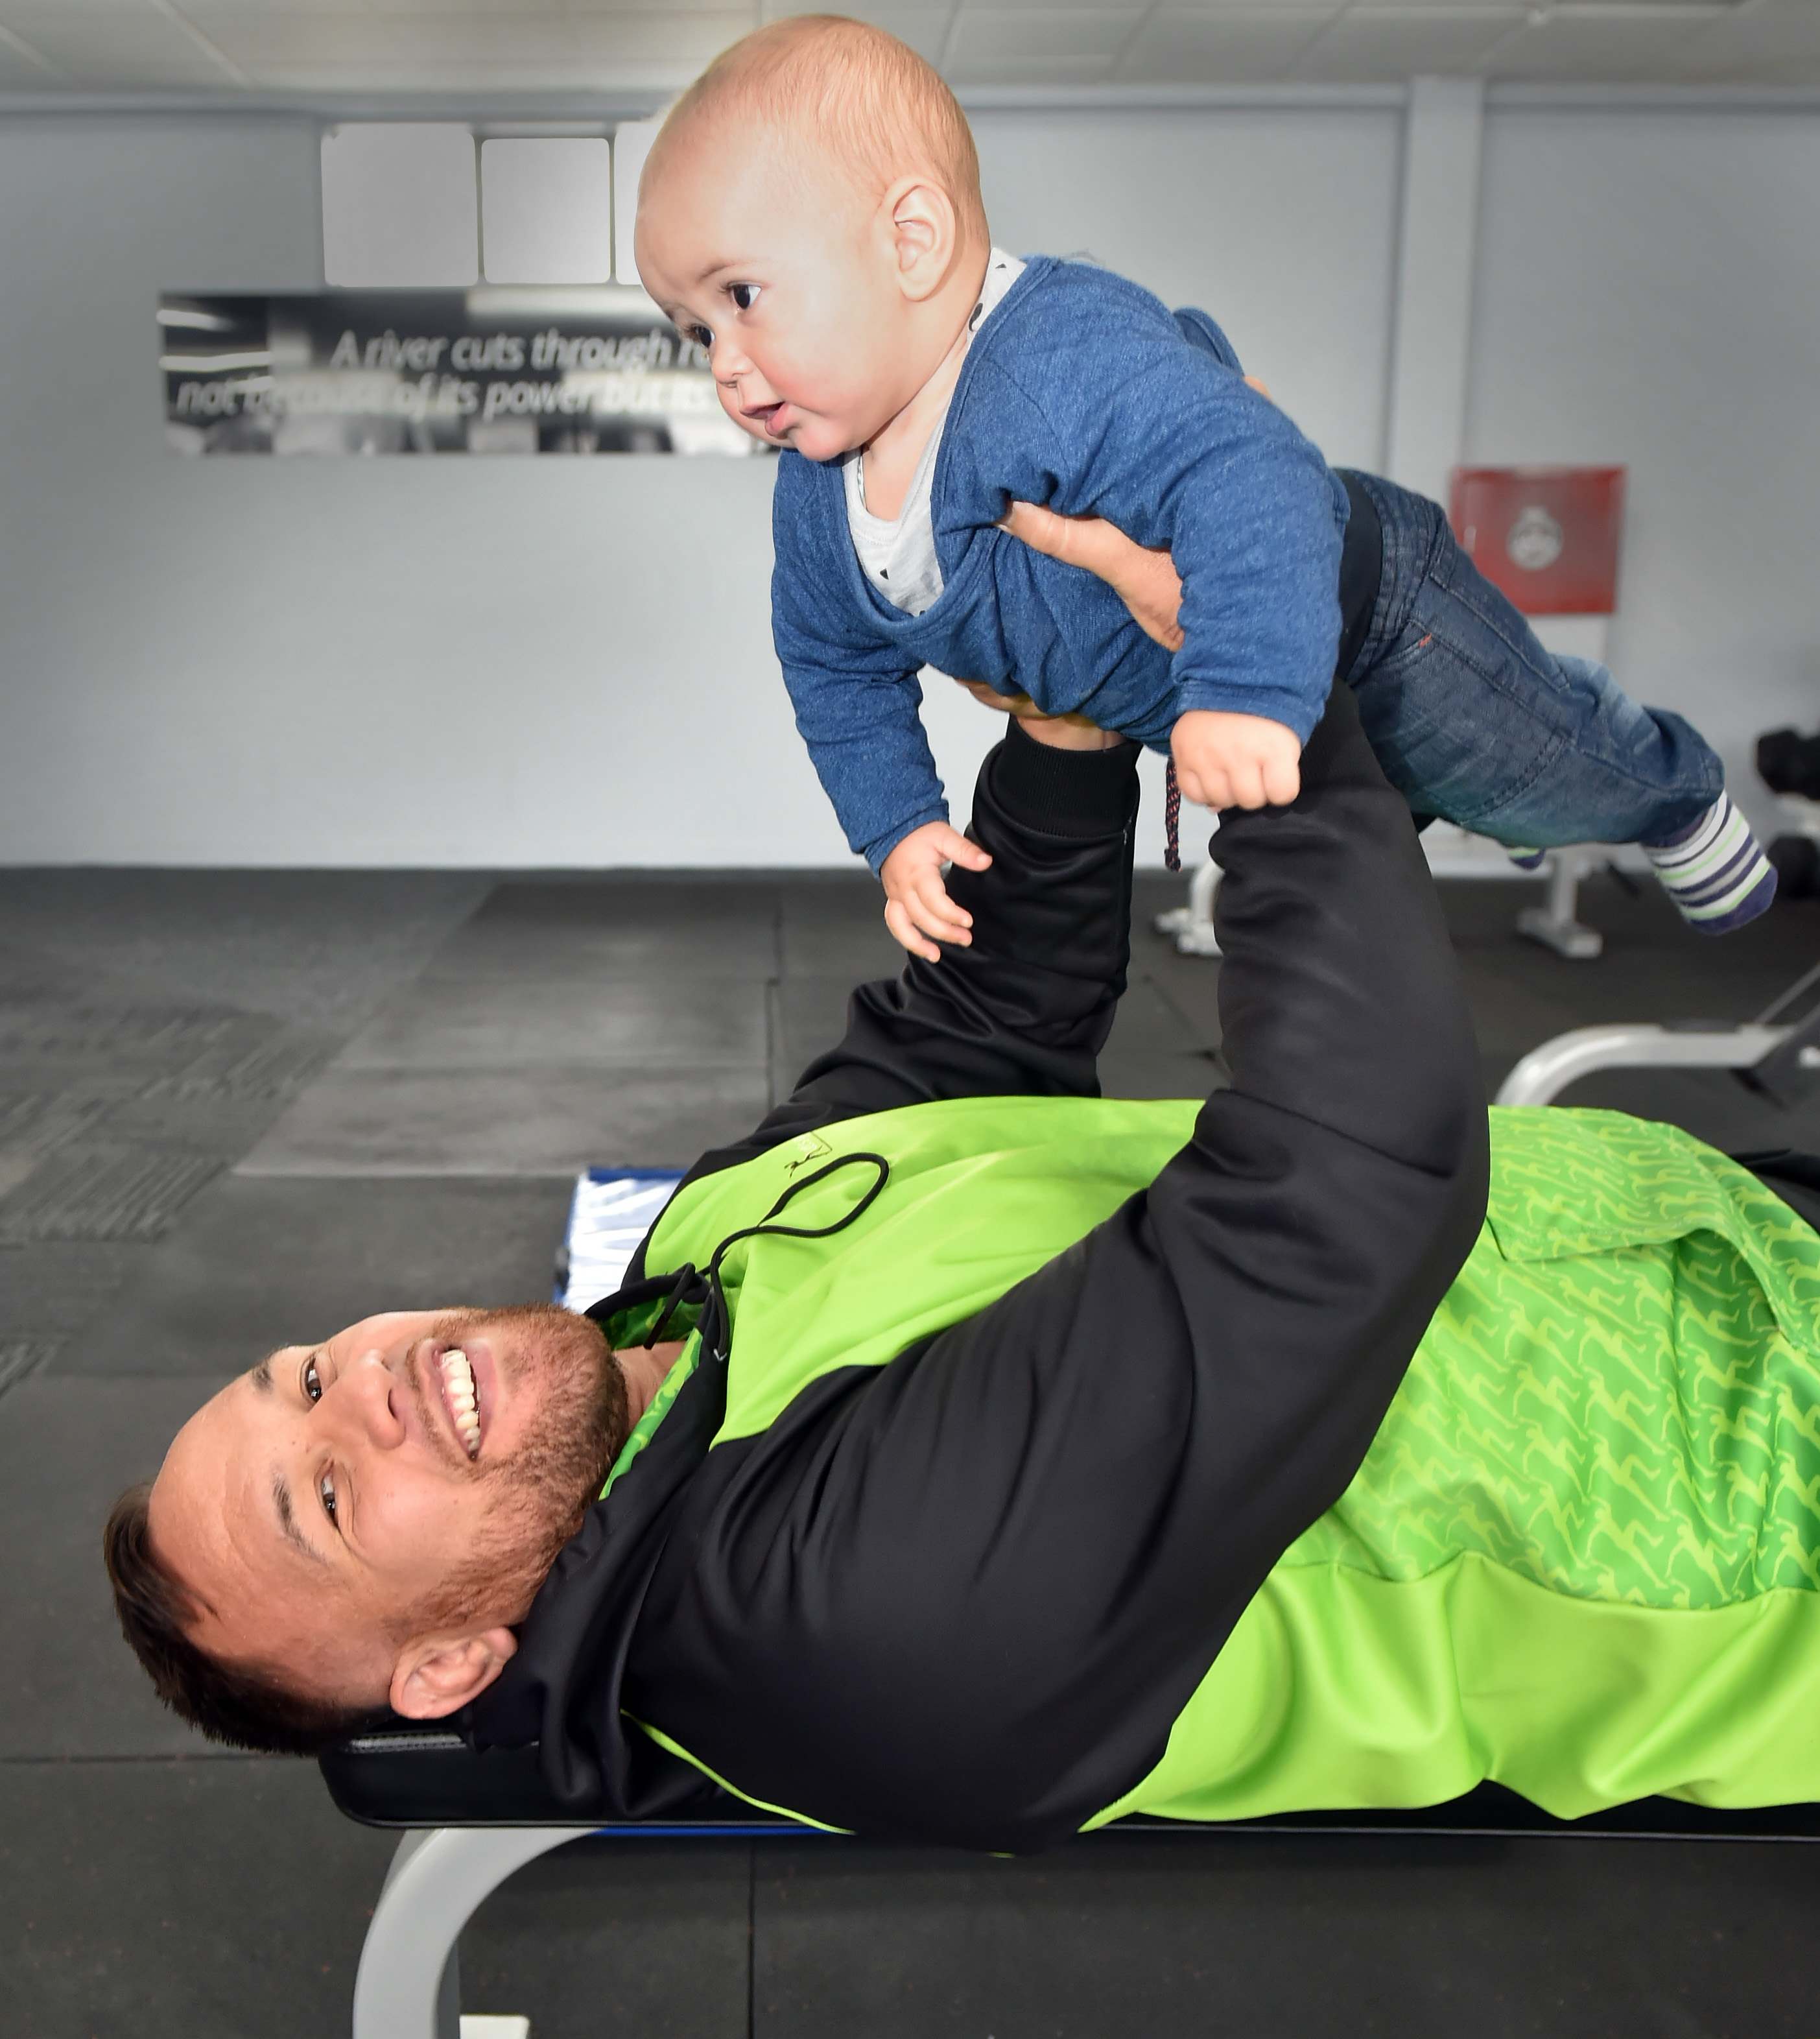 Club rugby veteran Peter Mirrielees plays with son Arlo-Manaaki (7 months) at Let's Go Fitness in...